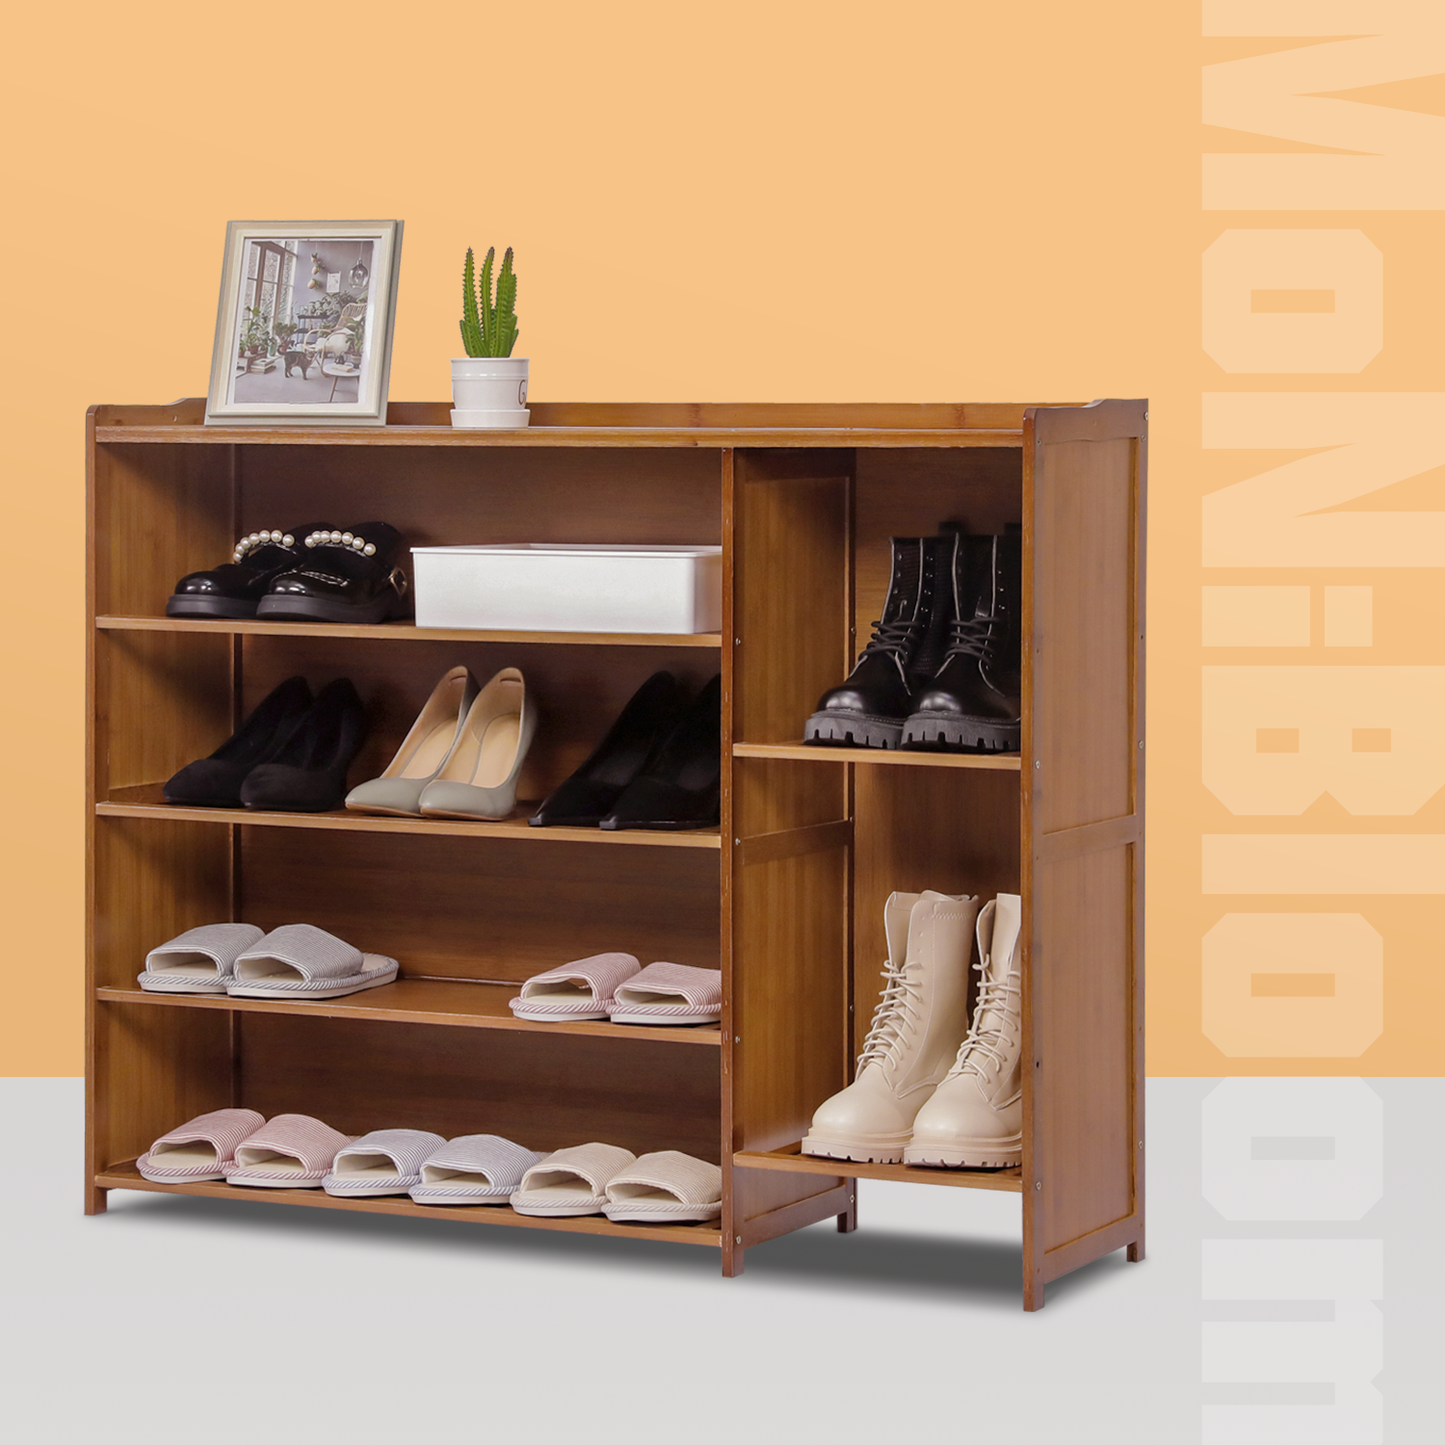 Shoe Organizer - Enclosed Back Panel with Side Boots Storage - 5 Tier - Brown